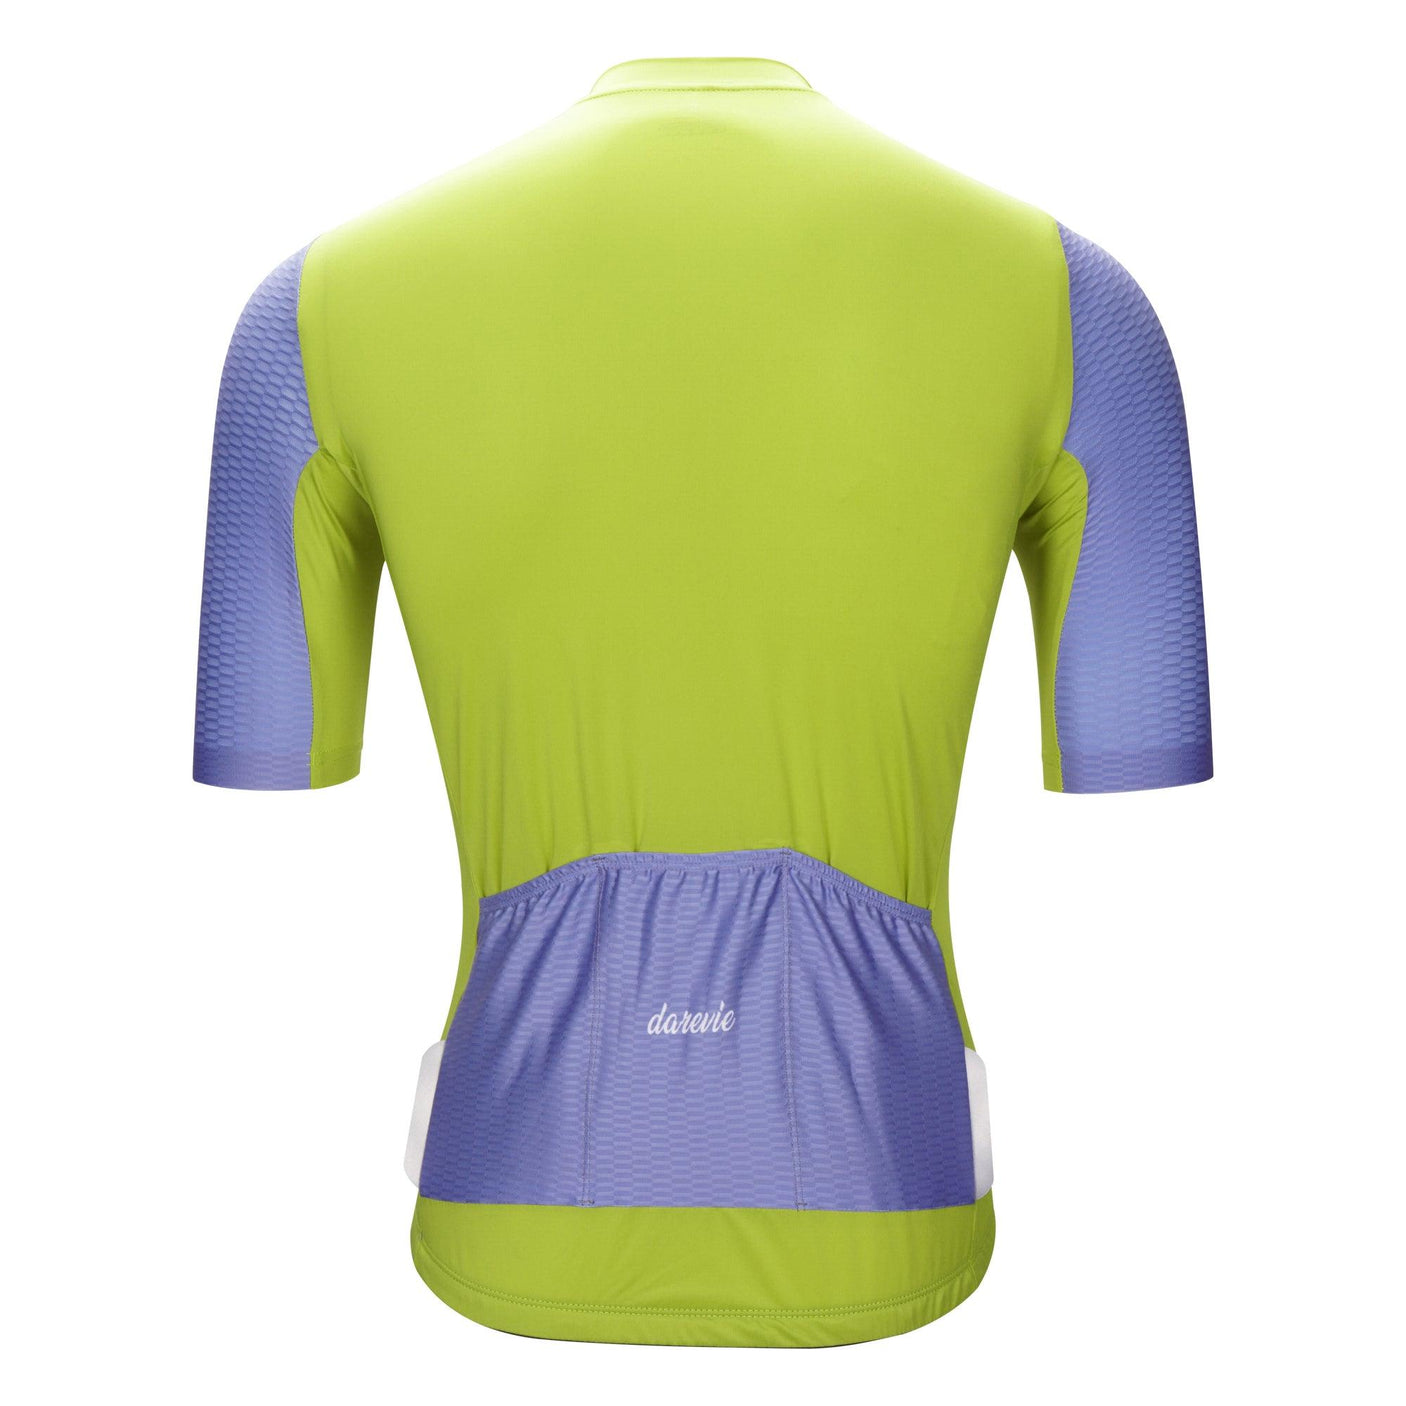 PRO LINE CYCLING JERSEY-Yellow-Back- Darevie Shop